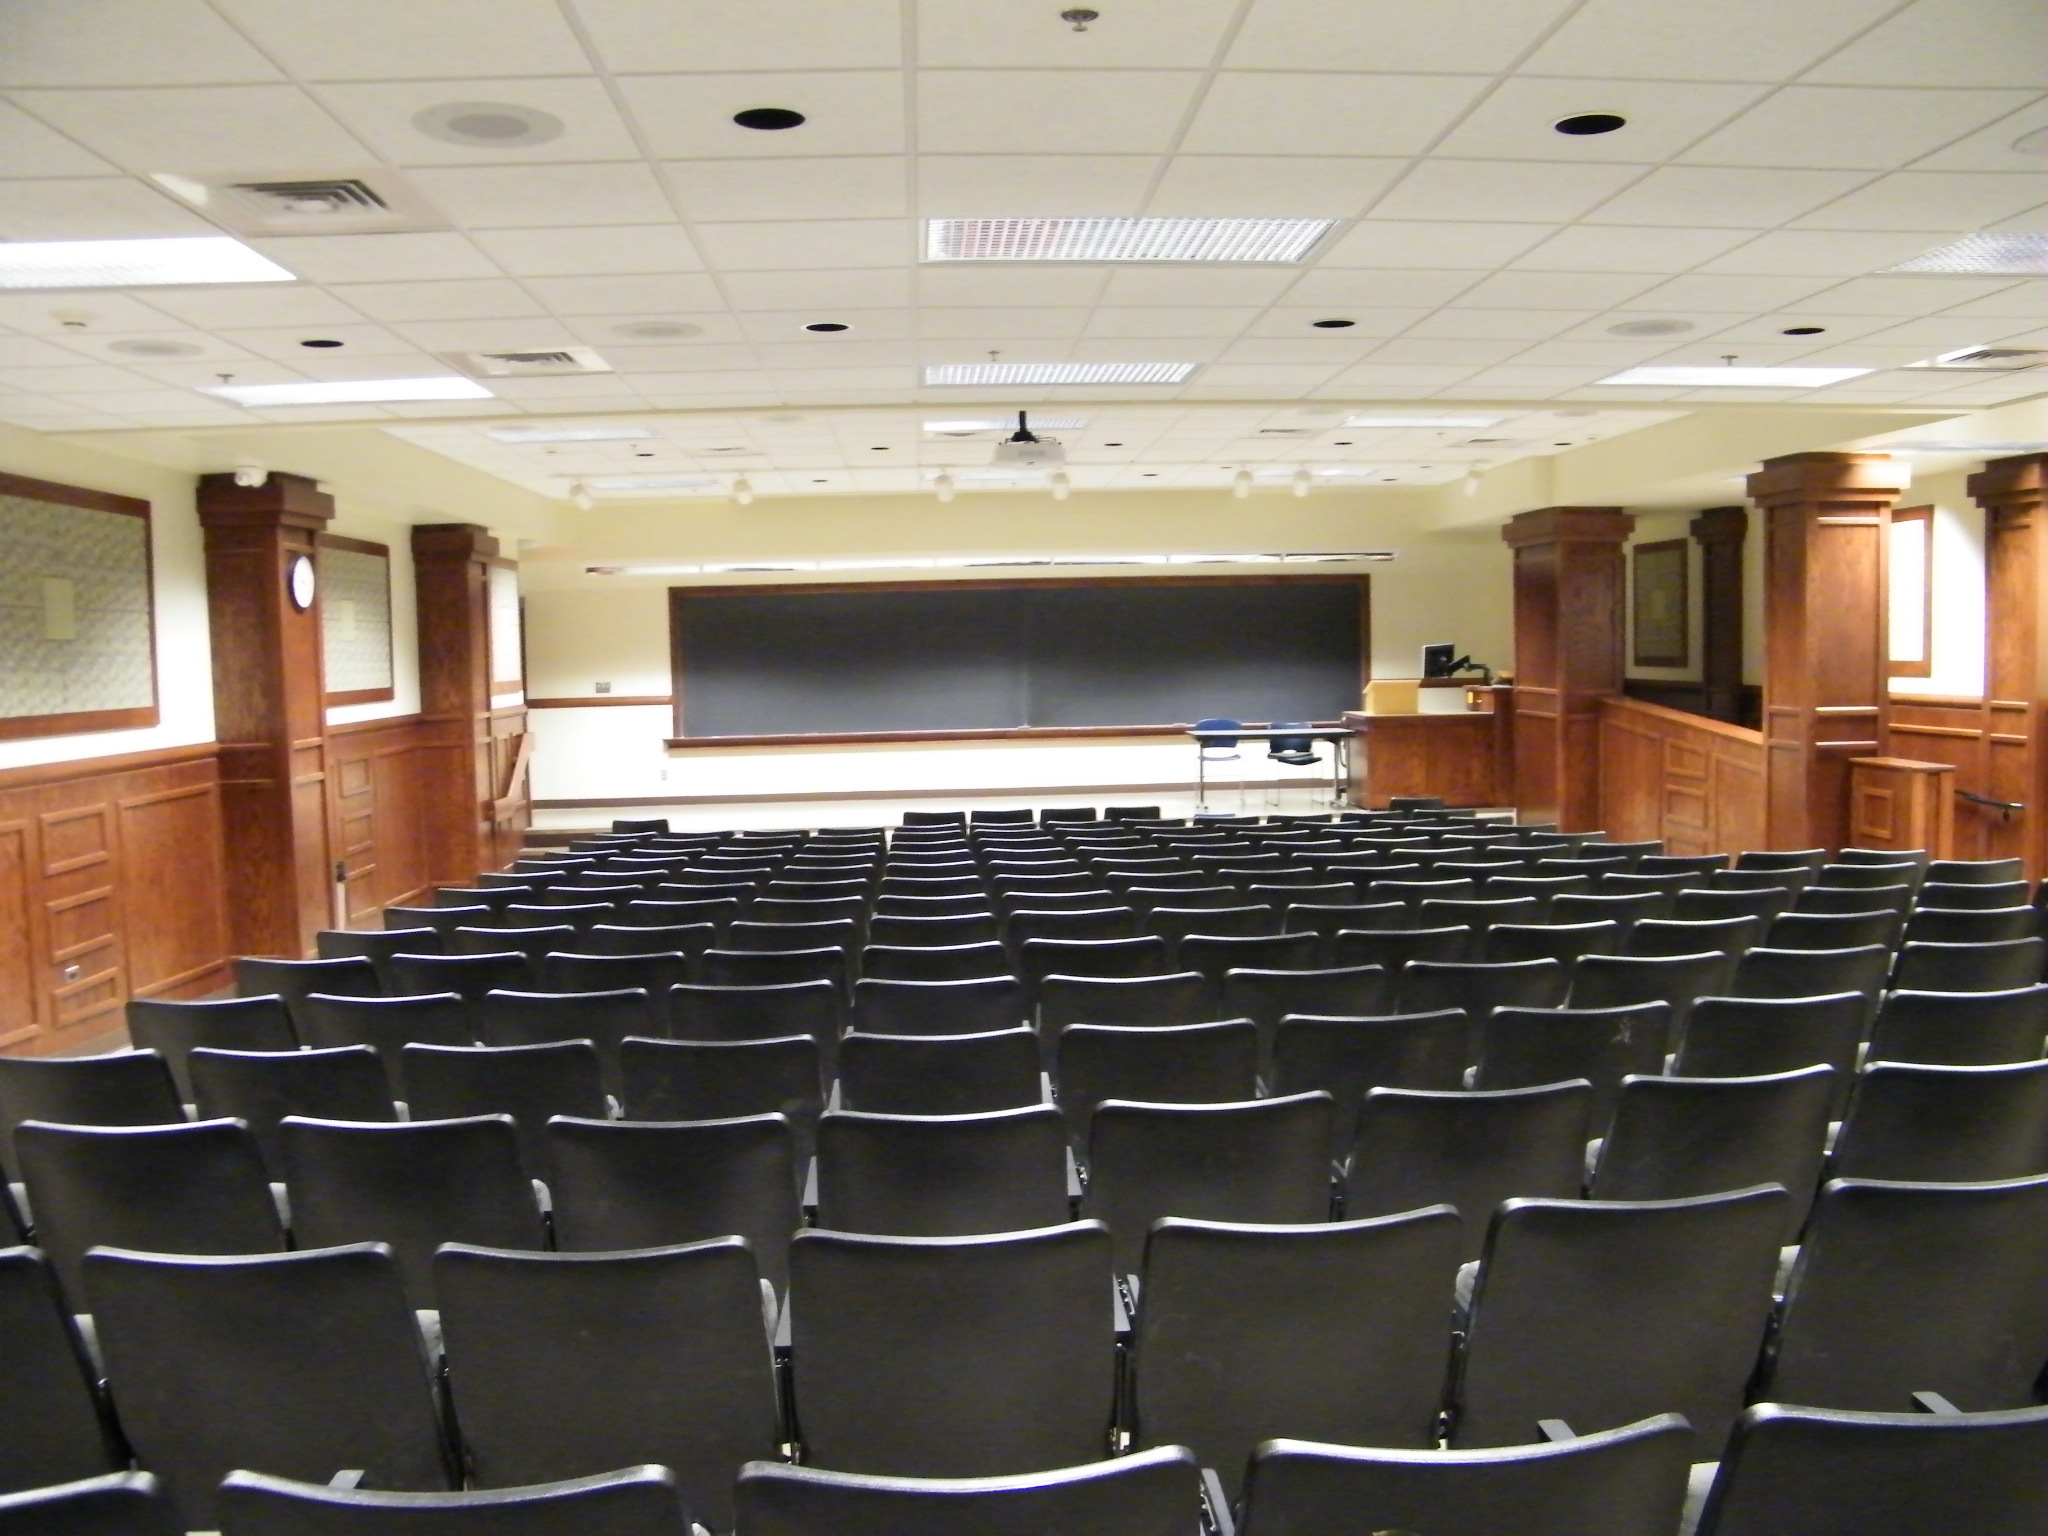 A view of the classroom with theater auditorium seating, stage, chalk board, and instructor lectern in front.